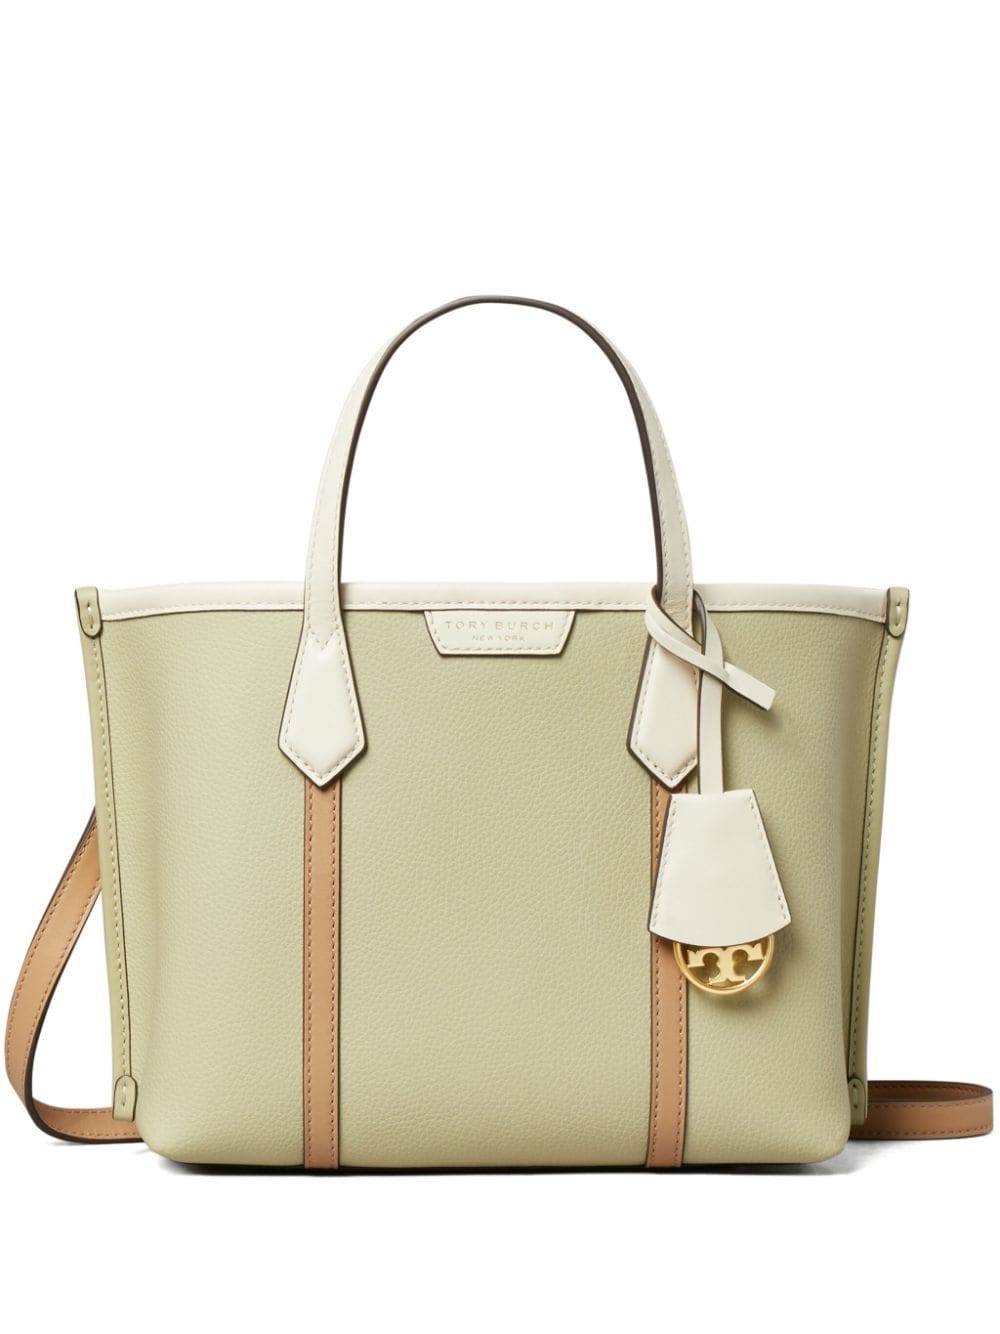 Tory Burch small Perry leather tote bag - Green von Tory Burch